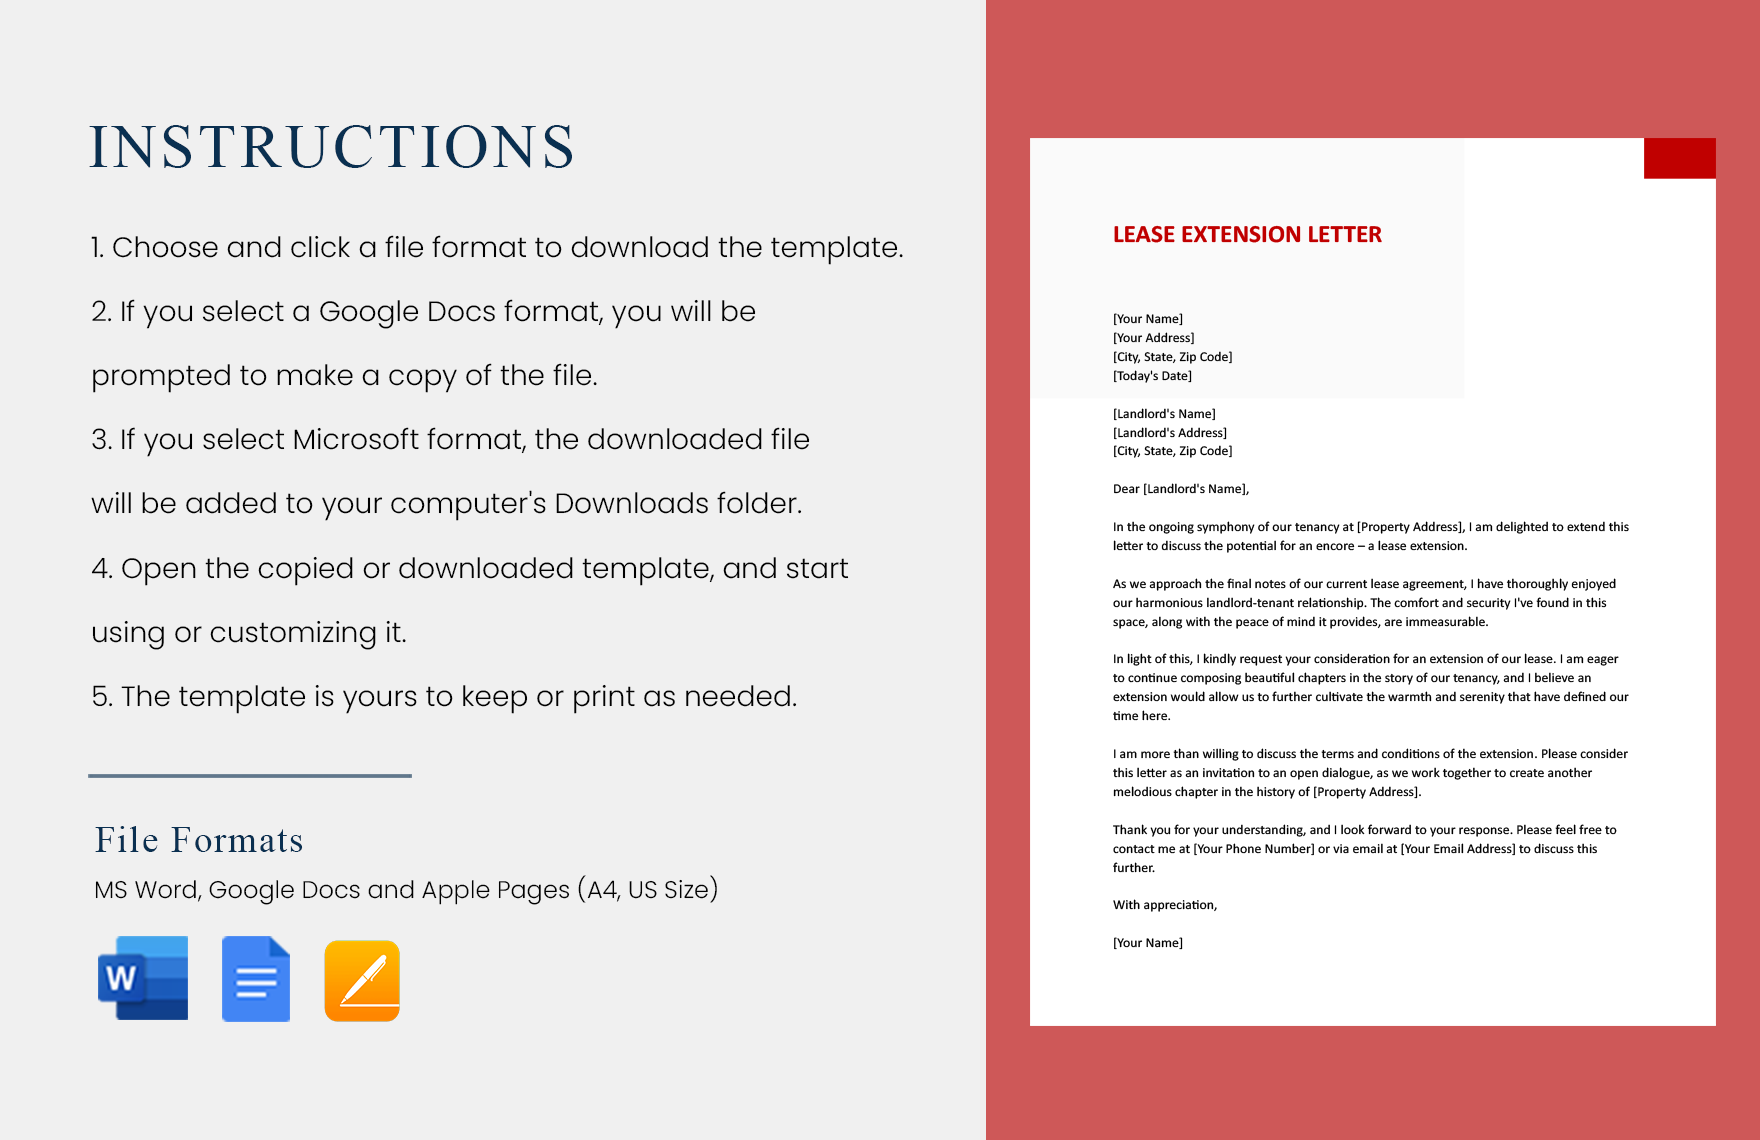 Lease Extension Letter